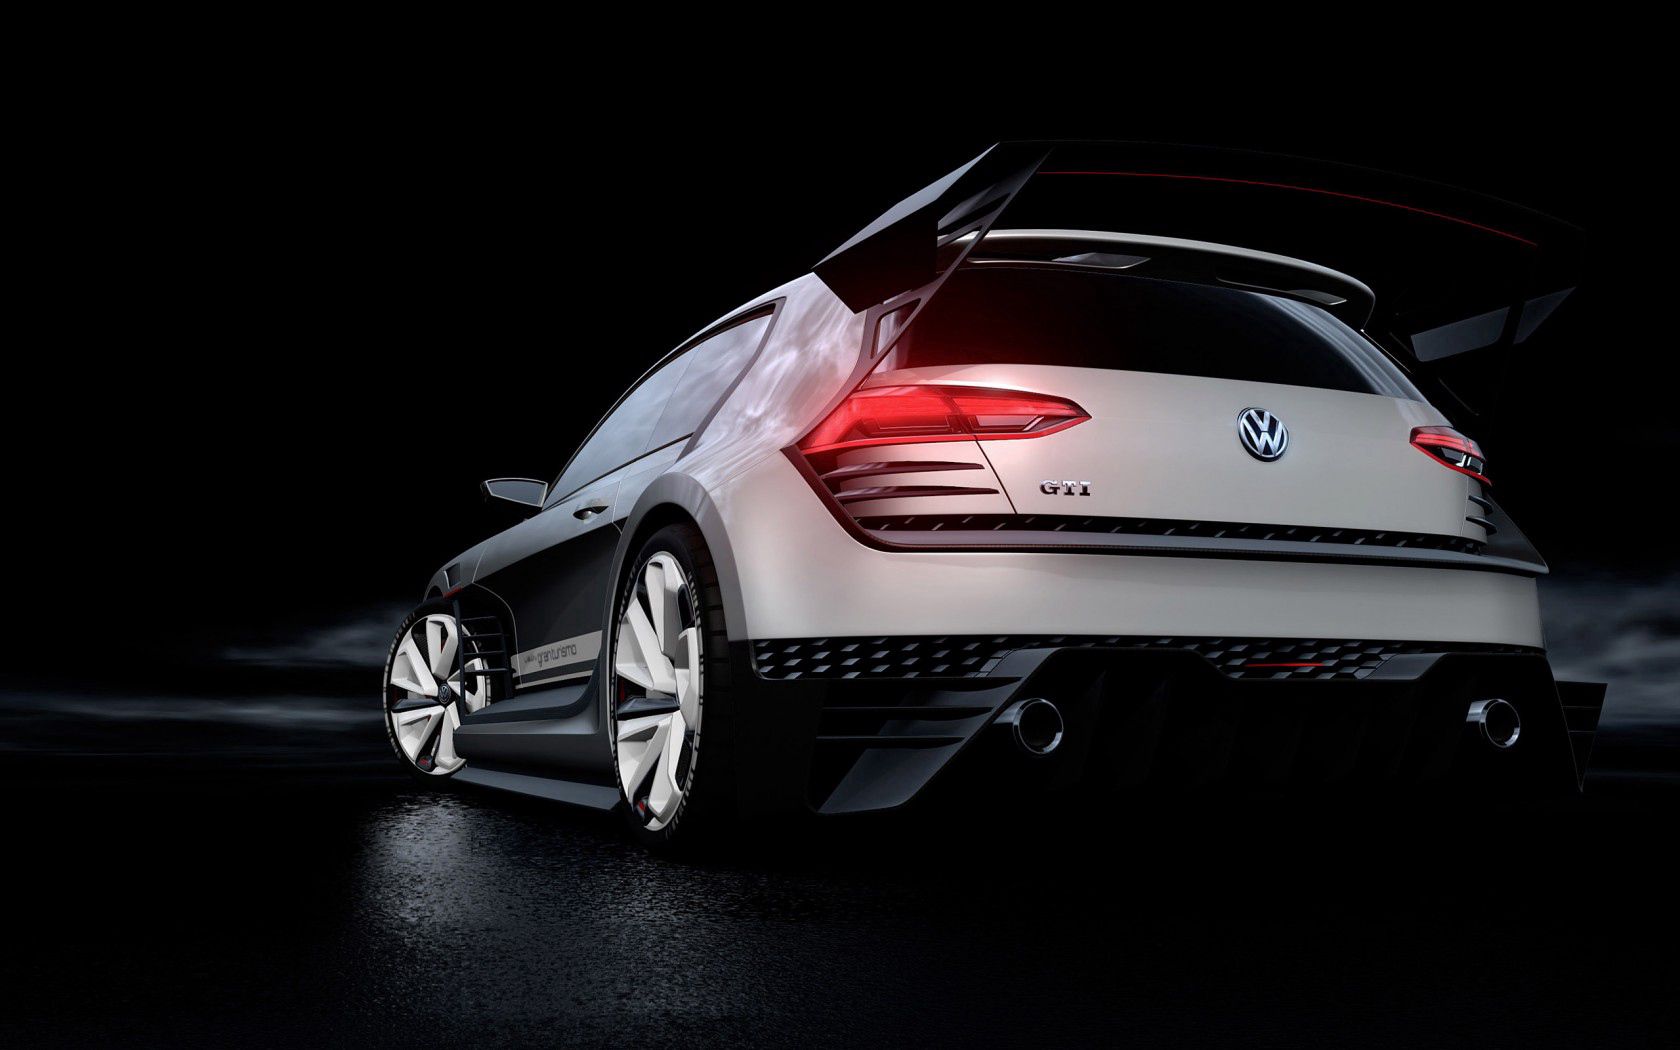 rear view, volkswagen, cars, concept, back view, style, gti